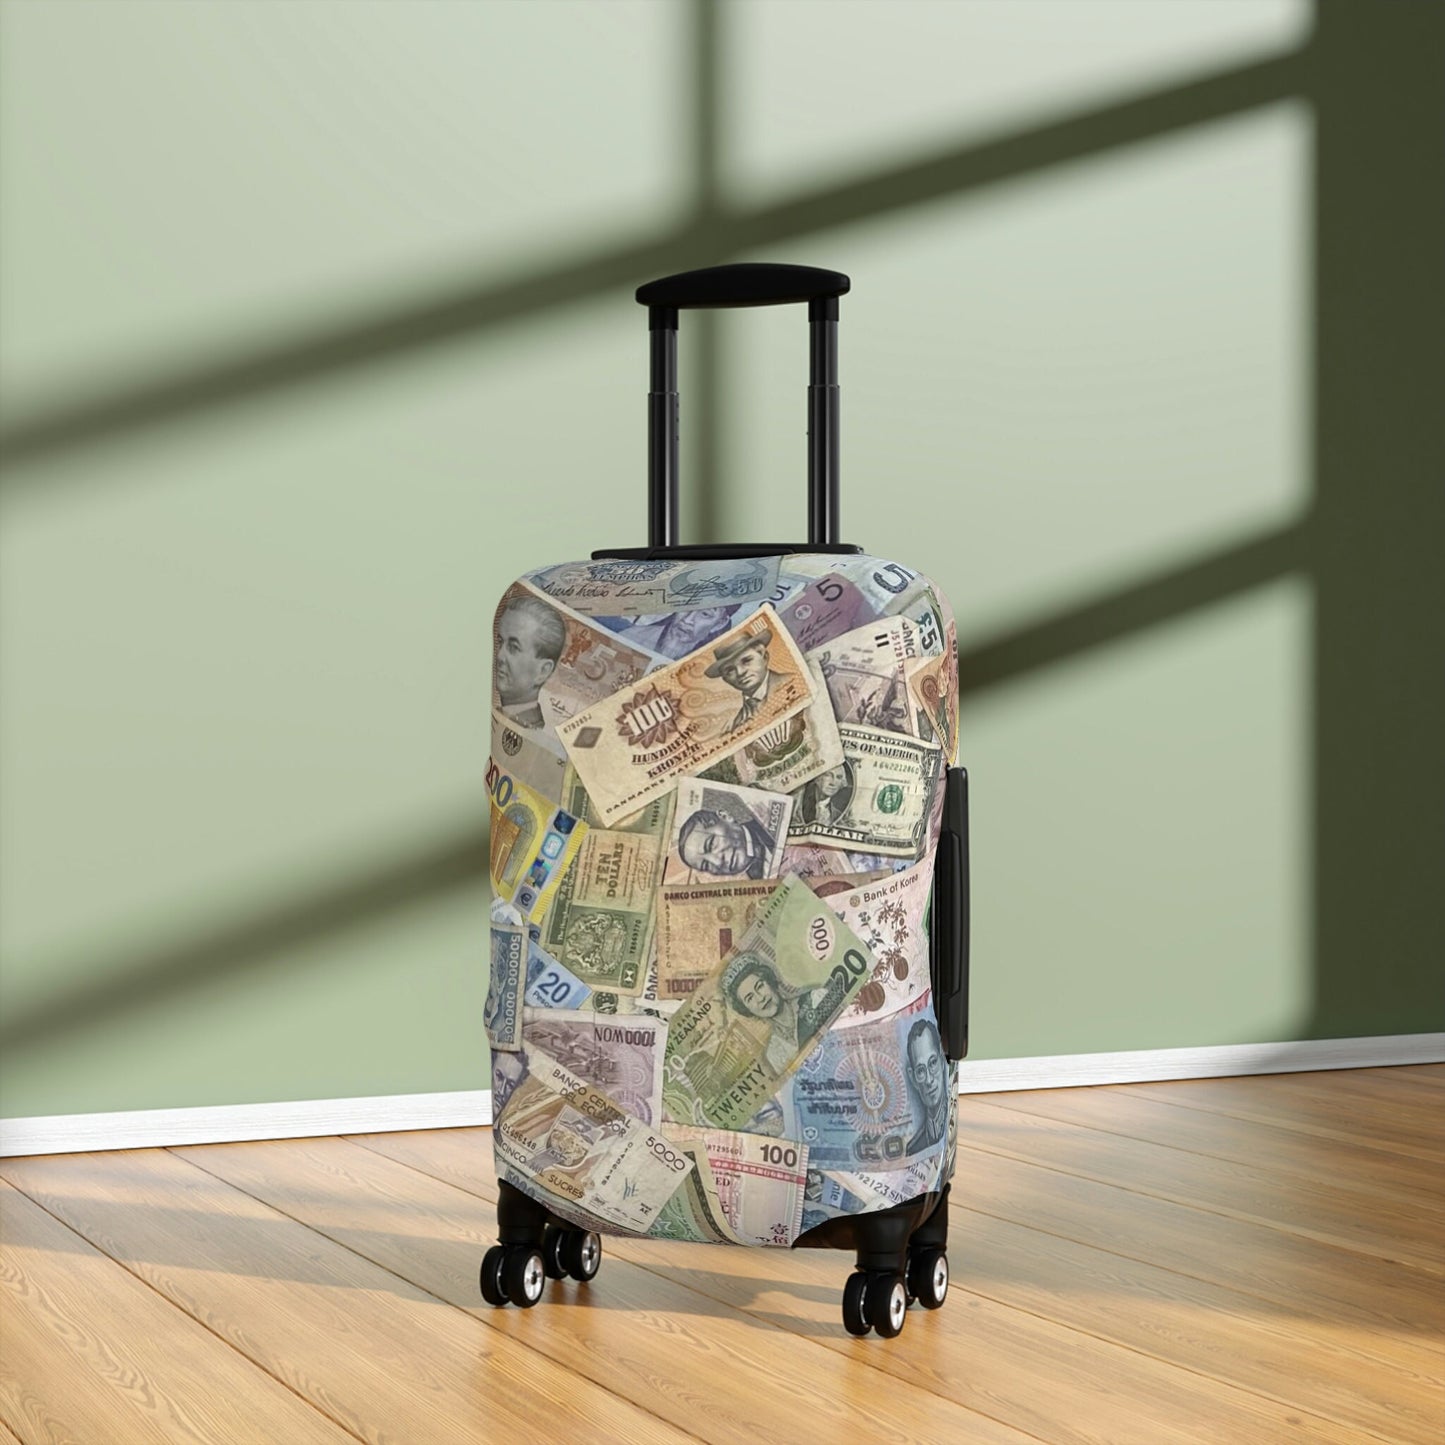 World Currency Suitcase Luggage Cover, perfect luggage cover for a world traveler, always find your covered suit case in baggage claim!